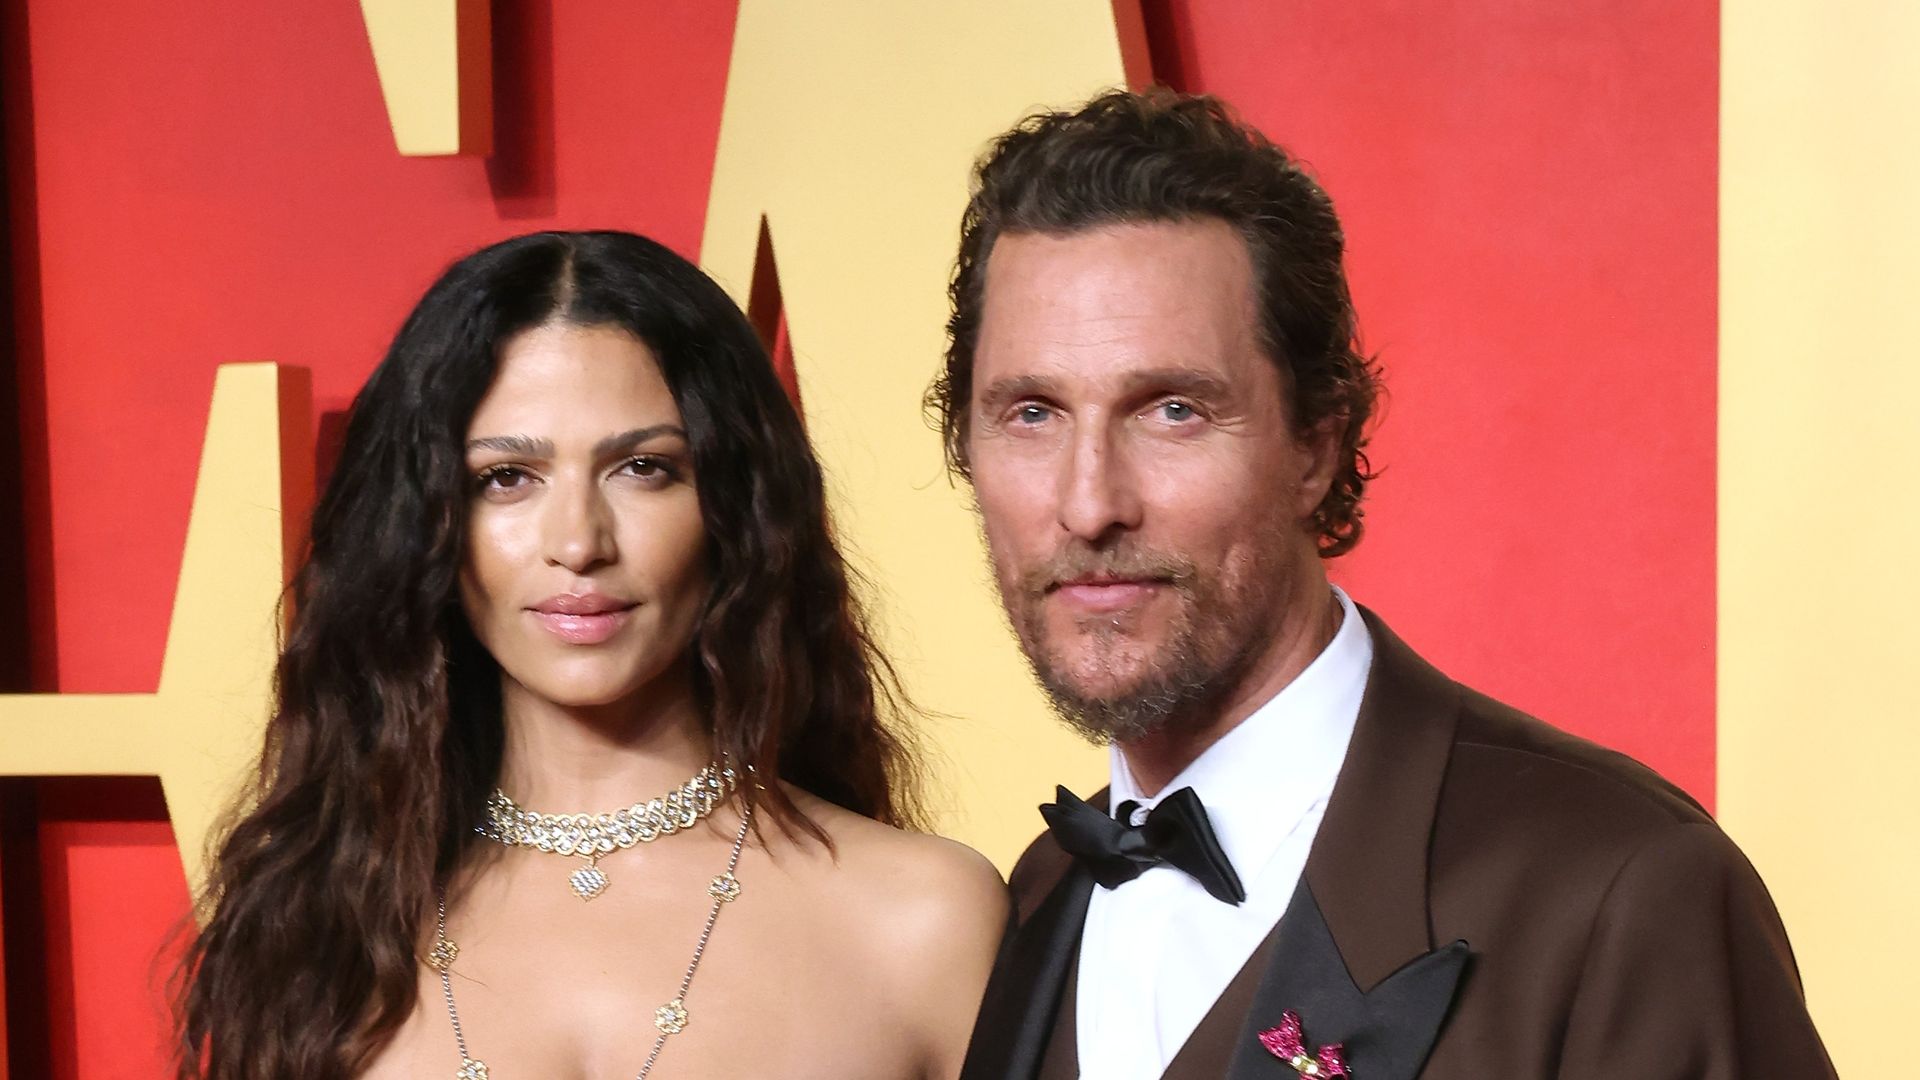 Matthew McConaughey and Camila Alves get photobombed by A-list third wheel in best snaps from Vanity Fair party